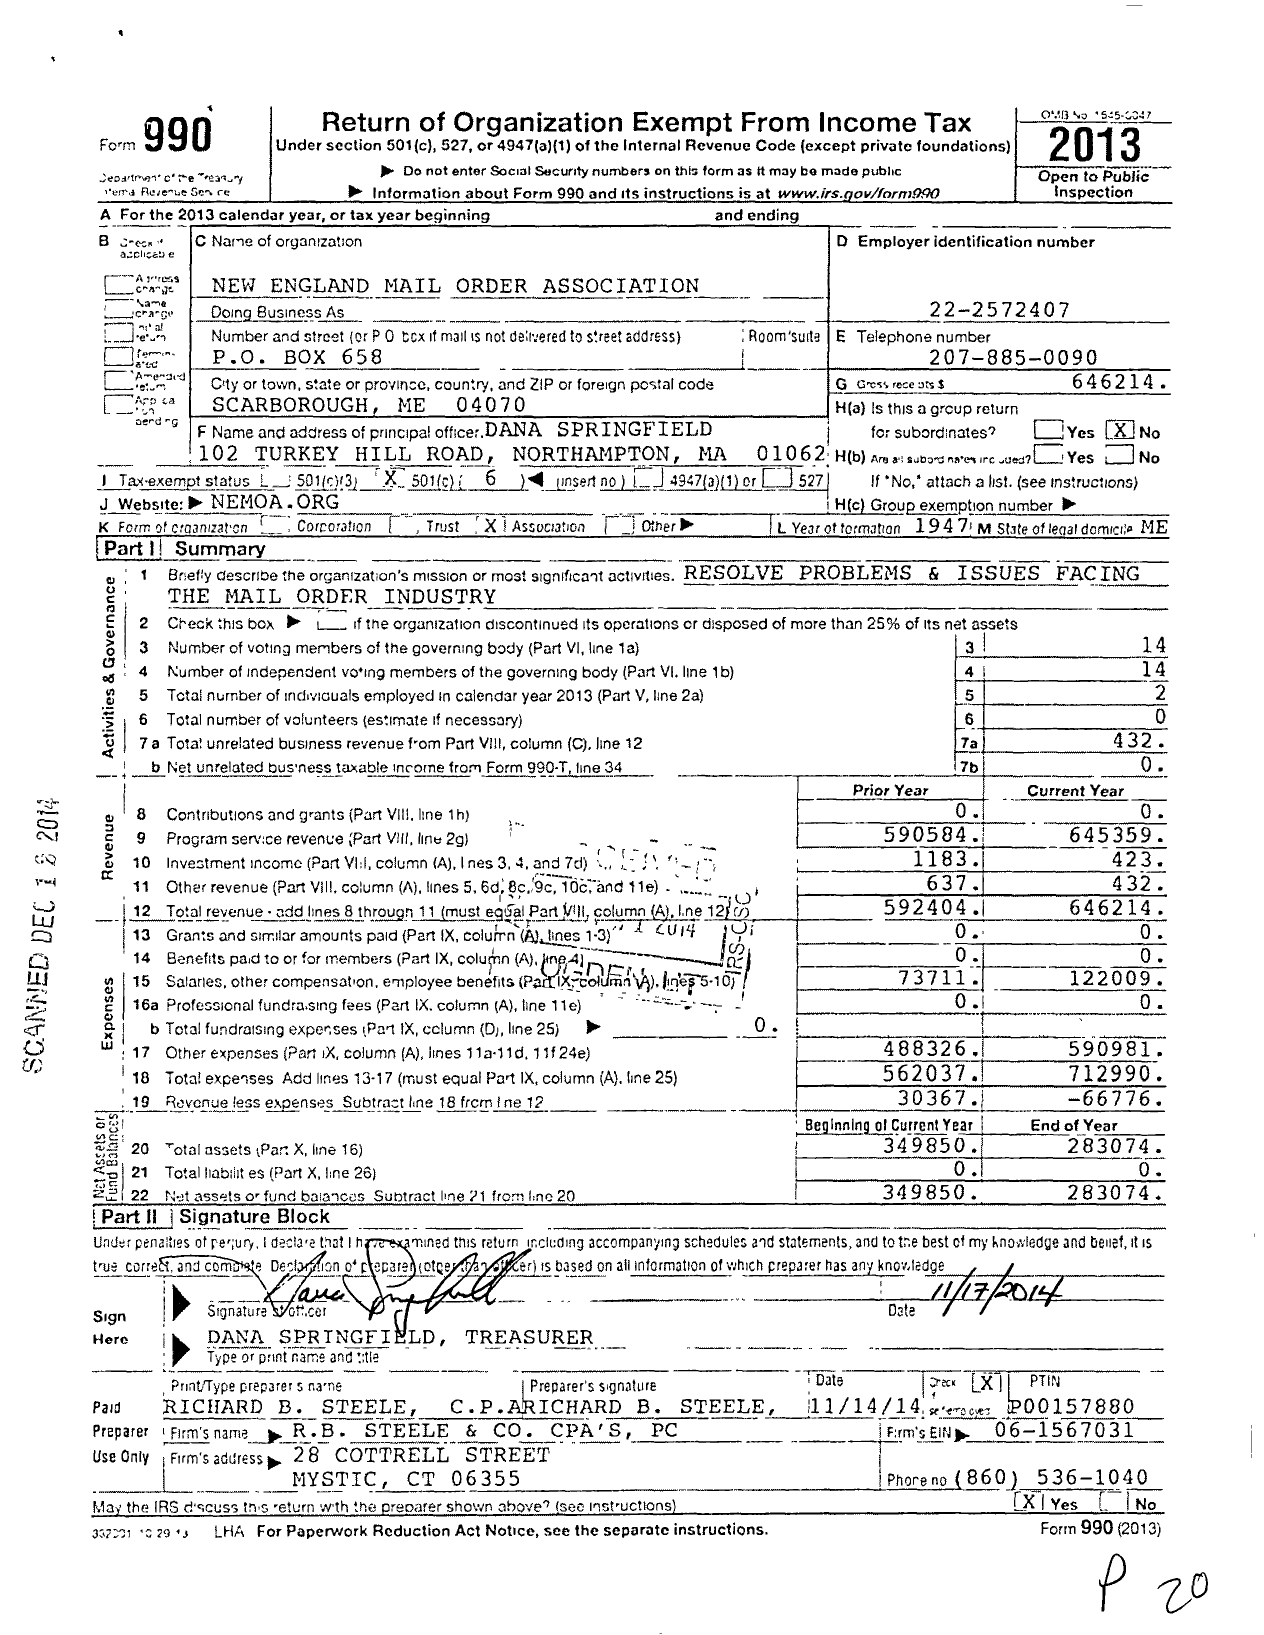 Image of first page of 2013 Form 990O for New England Mail Order Association